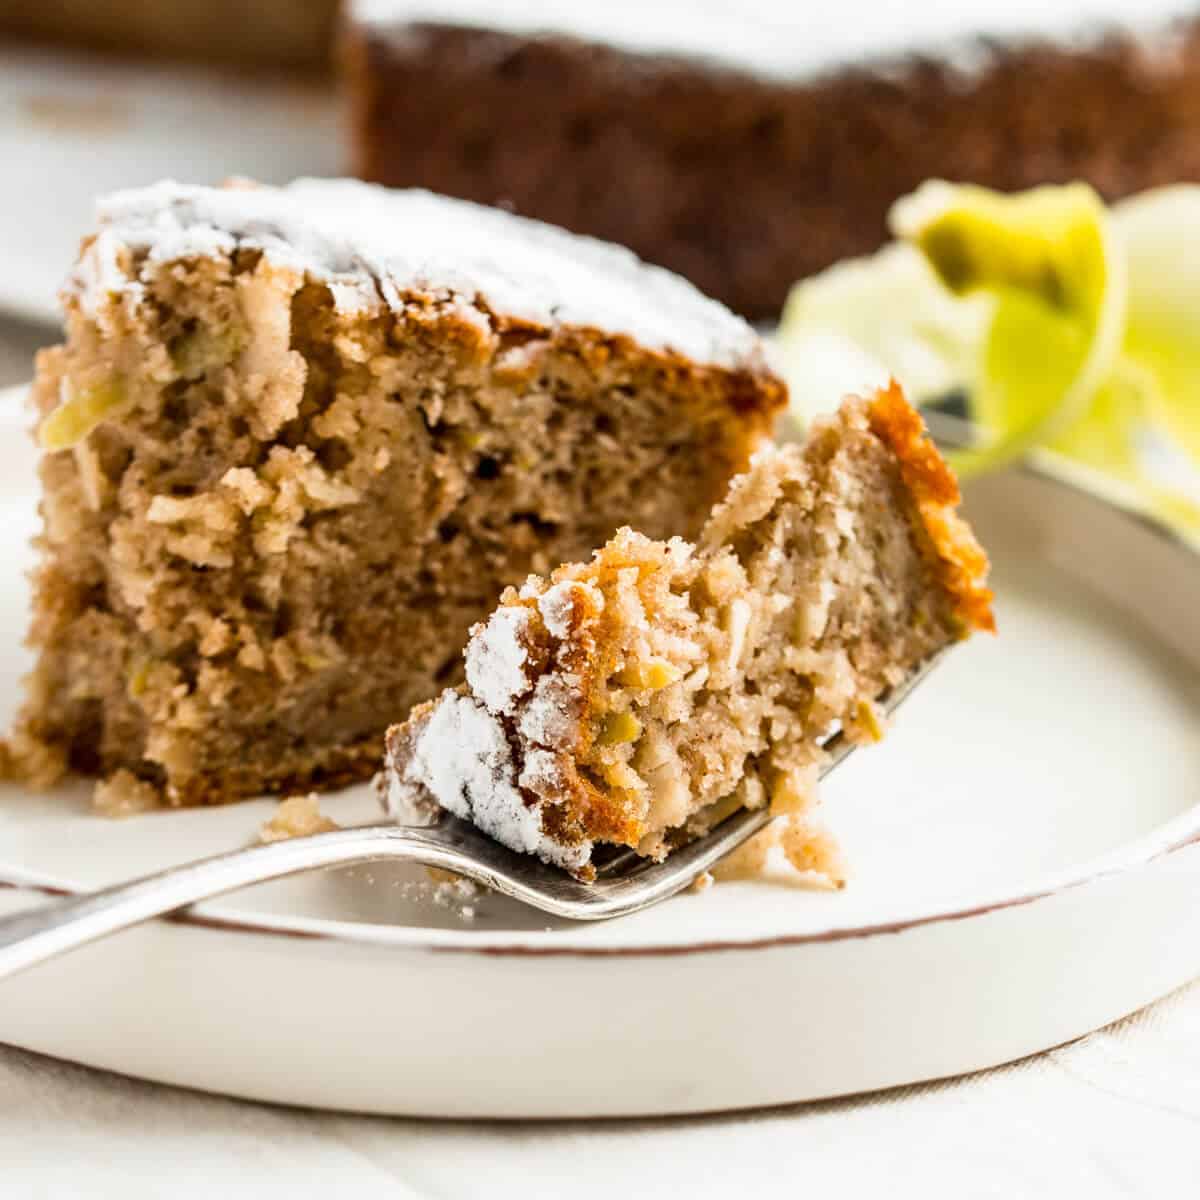 slice of spiced apple cake on a plate with vintage fork